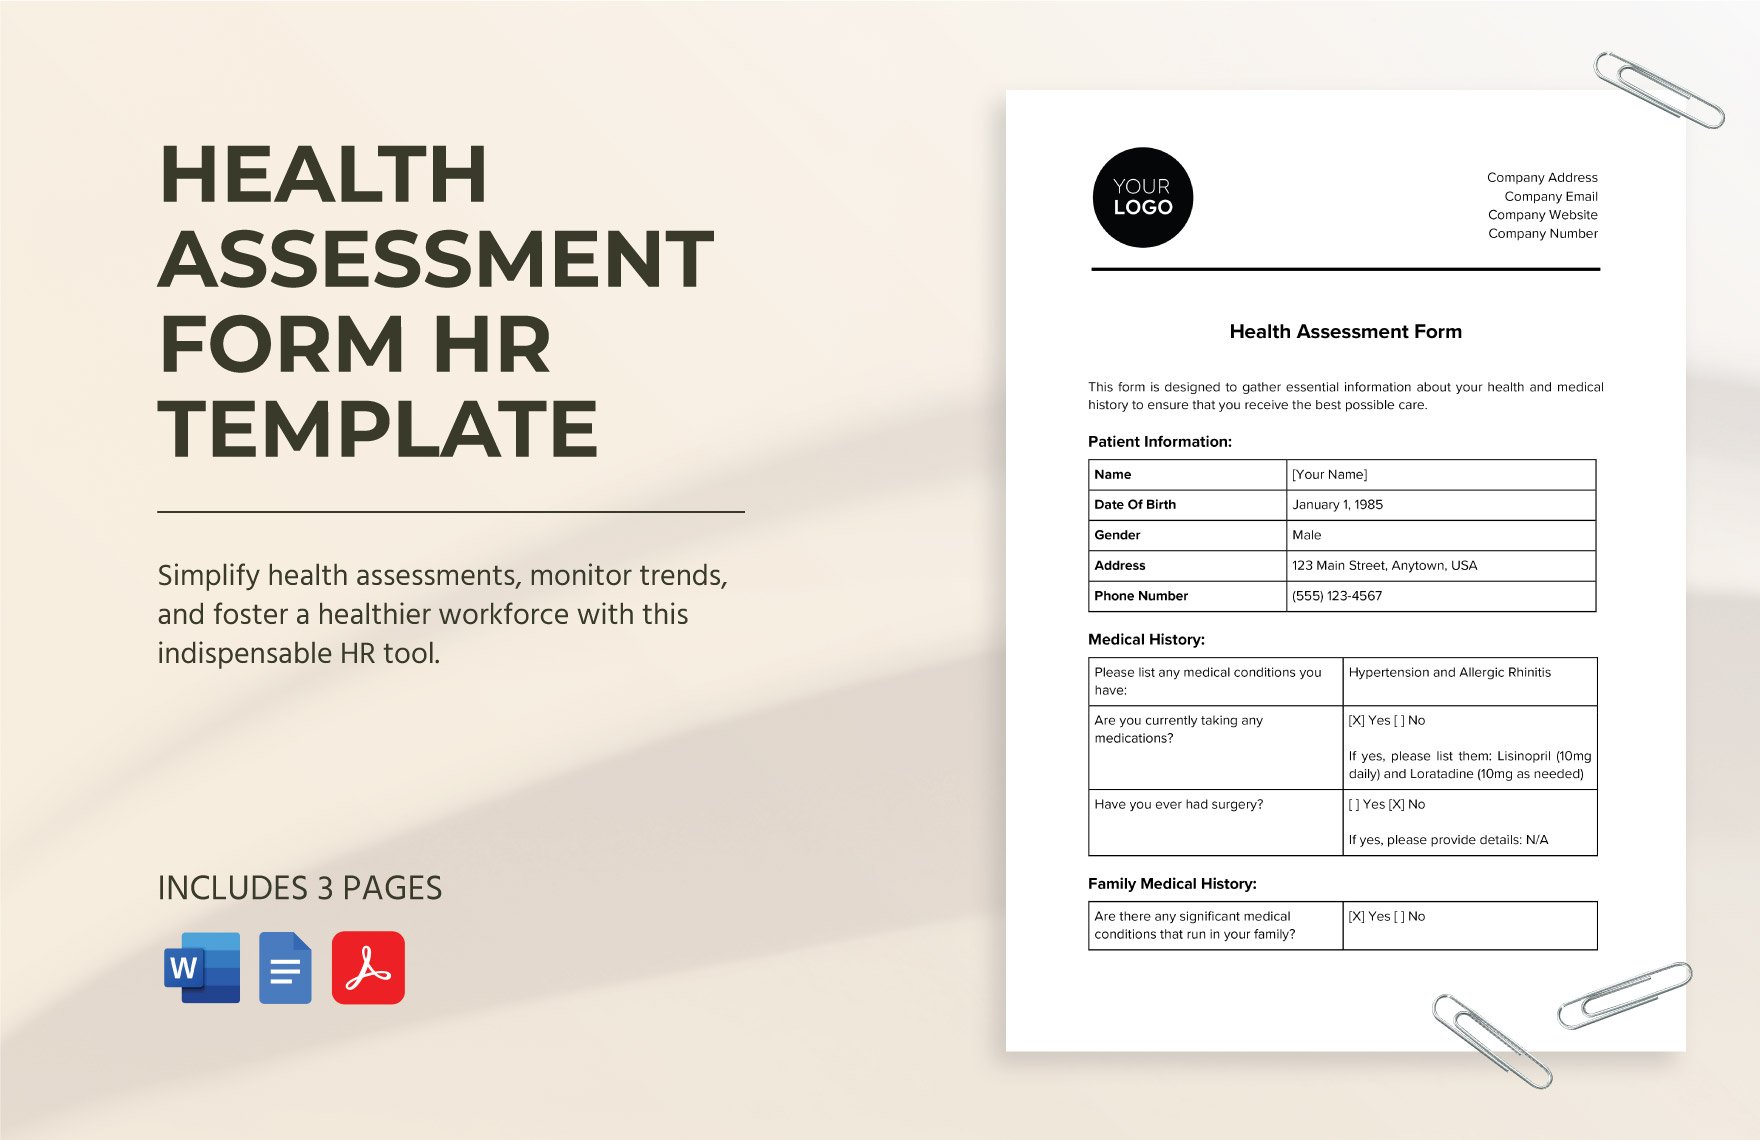 Health Assessment Form HR Template in Word, Google Docs, PDF